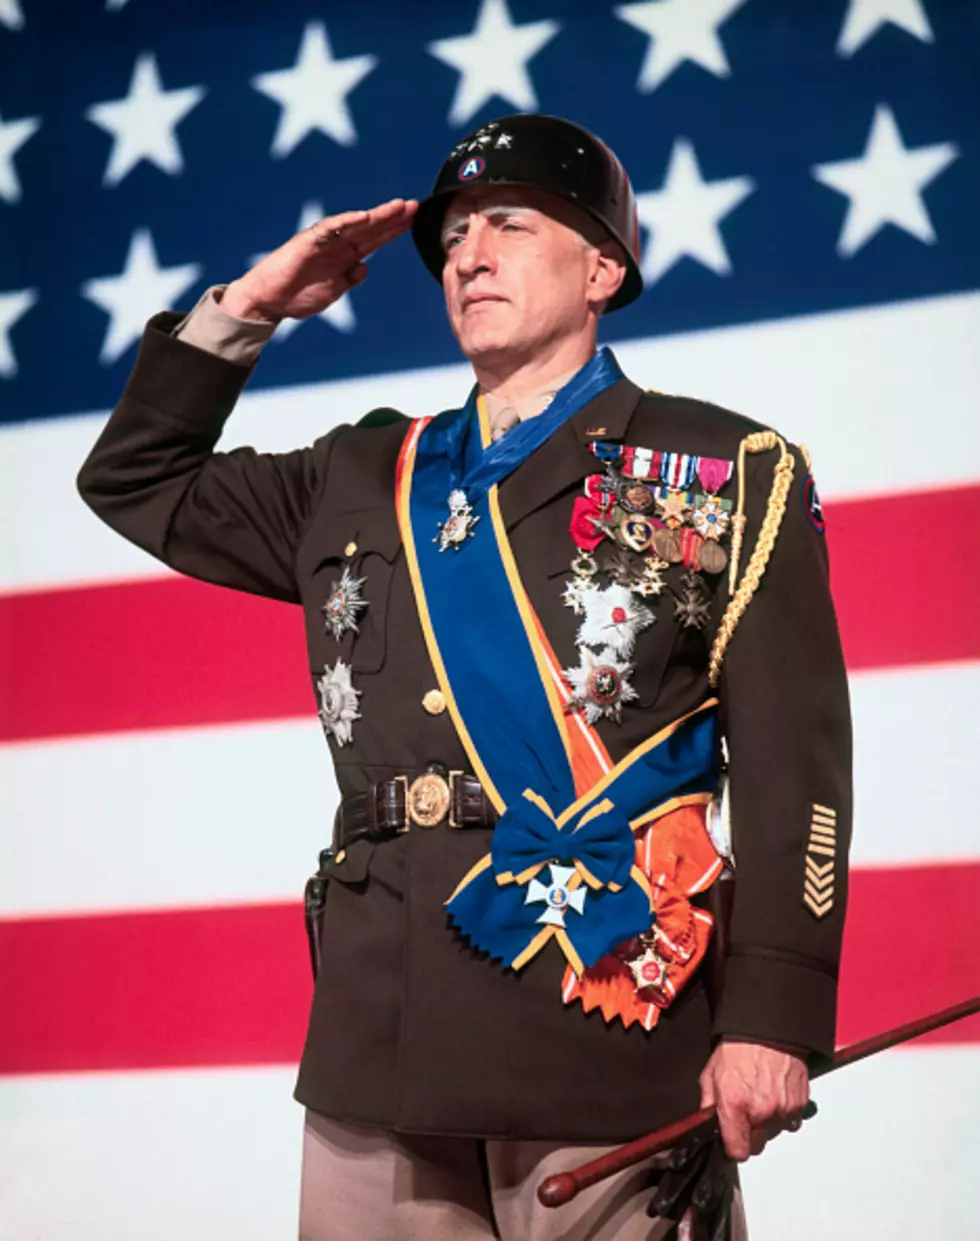 Like Gen. Patton, Trump is unorthodox and unstoppable